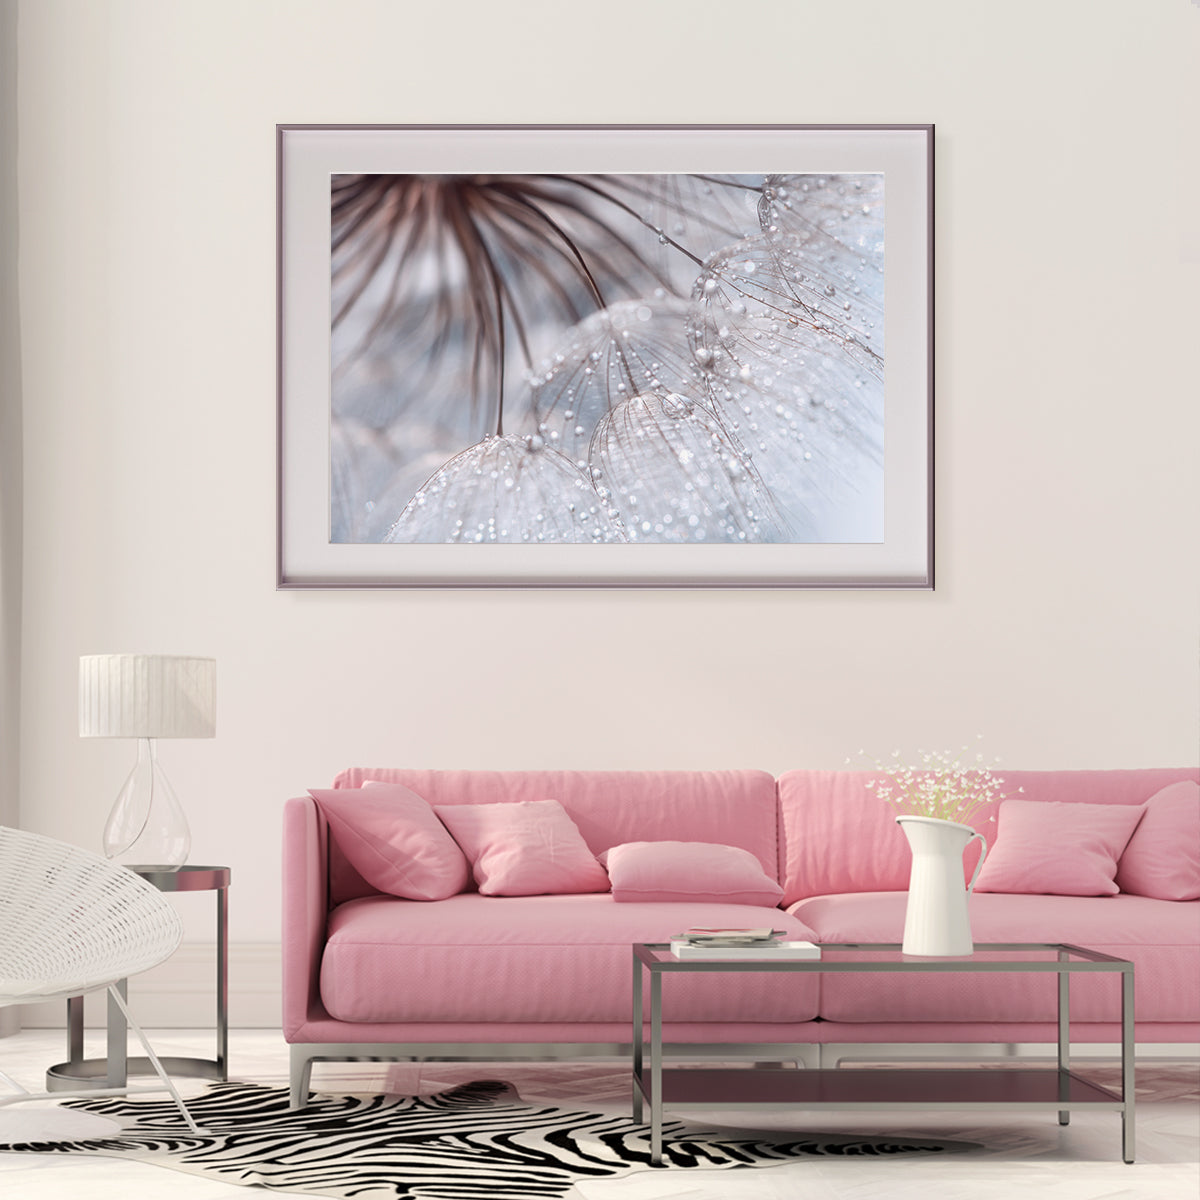 Tender Dandelion with Water Drops Posters Art Prints For Your Wall-Horizontal Posters NOT FRAMED-CetArt-10″x8″ inches-CetArt